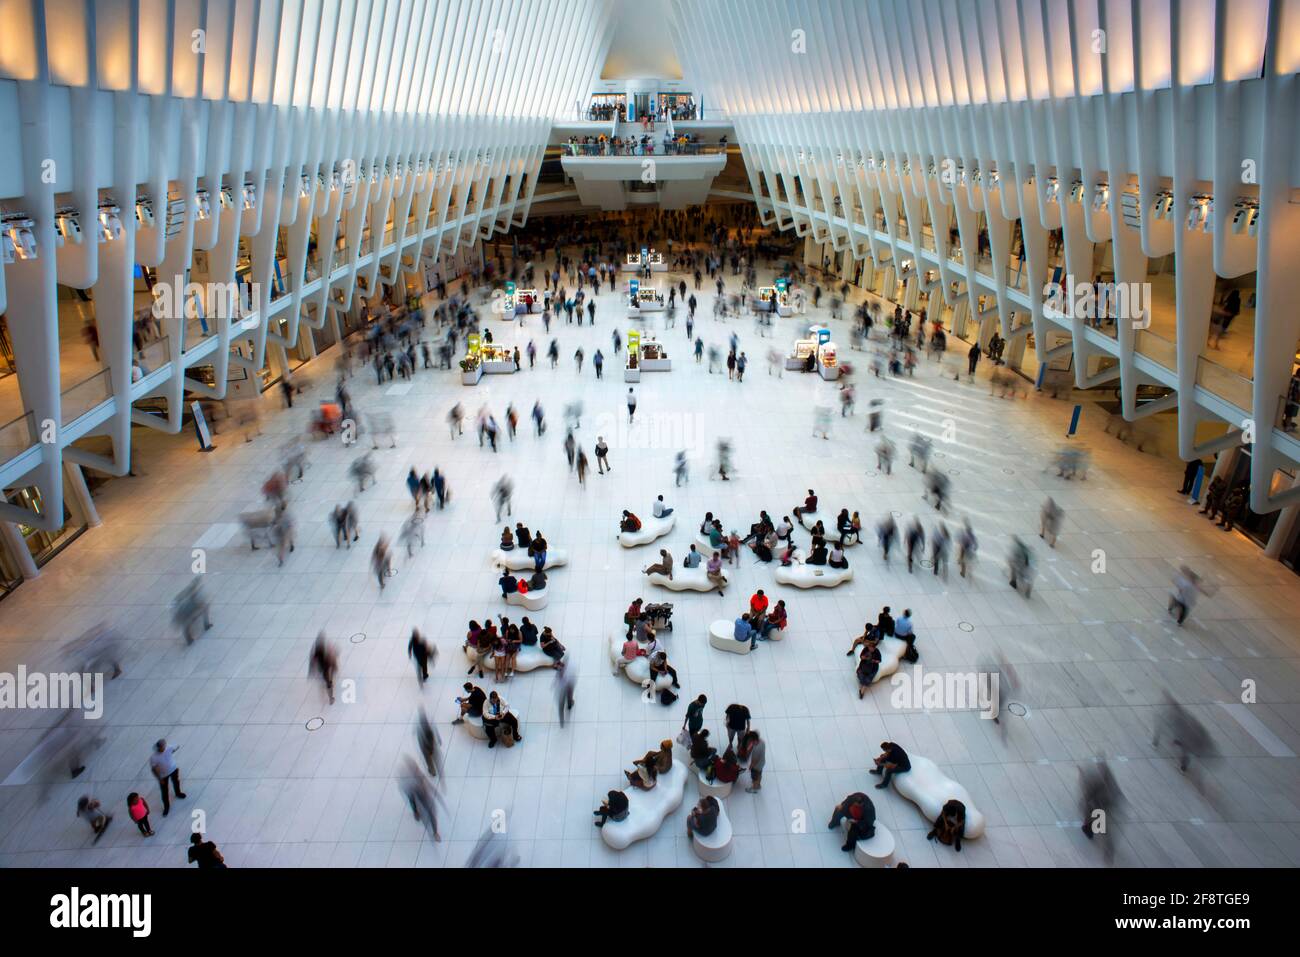 The Oculus at the World Trade Center, Attractions